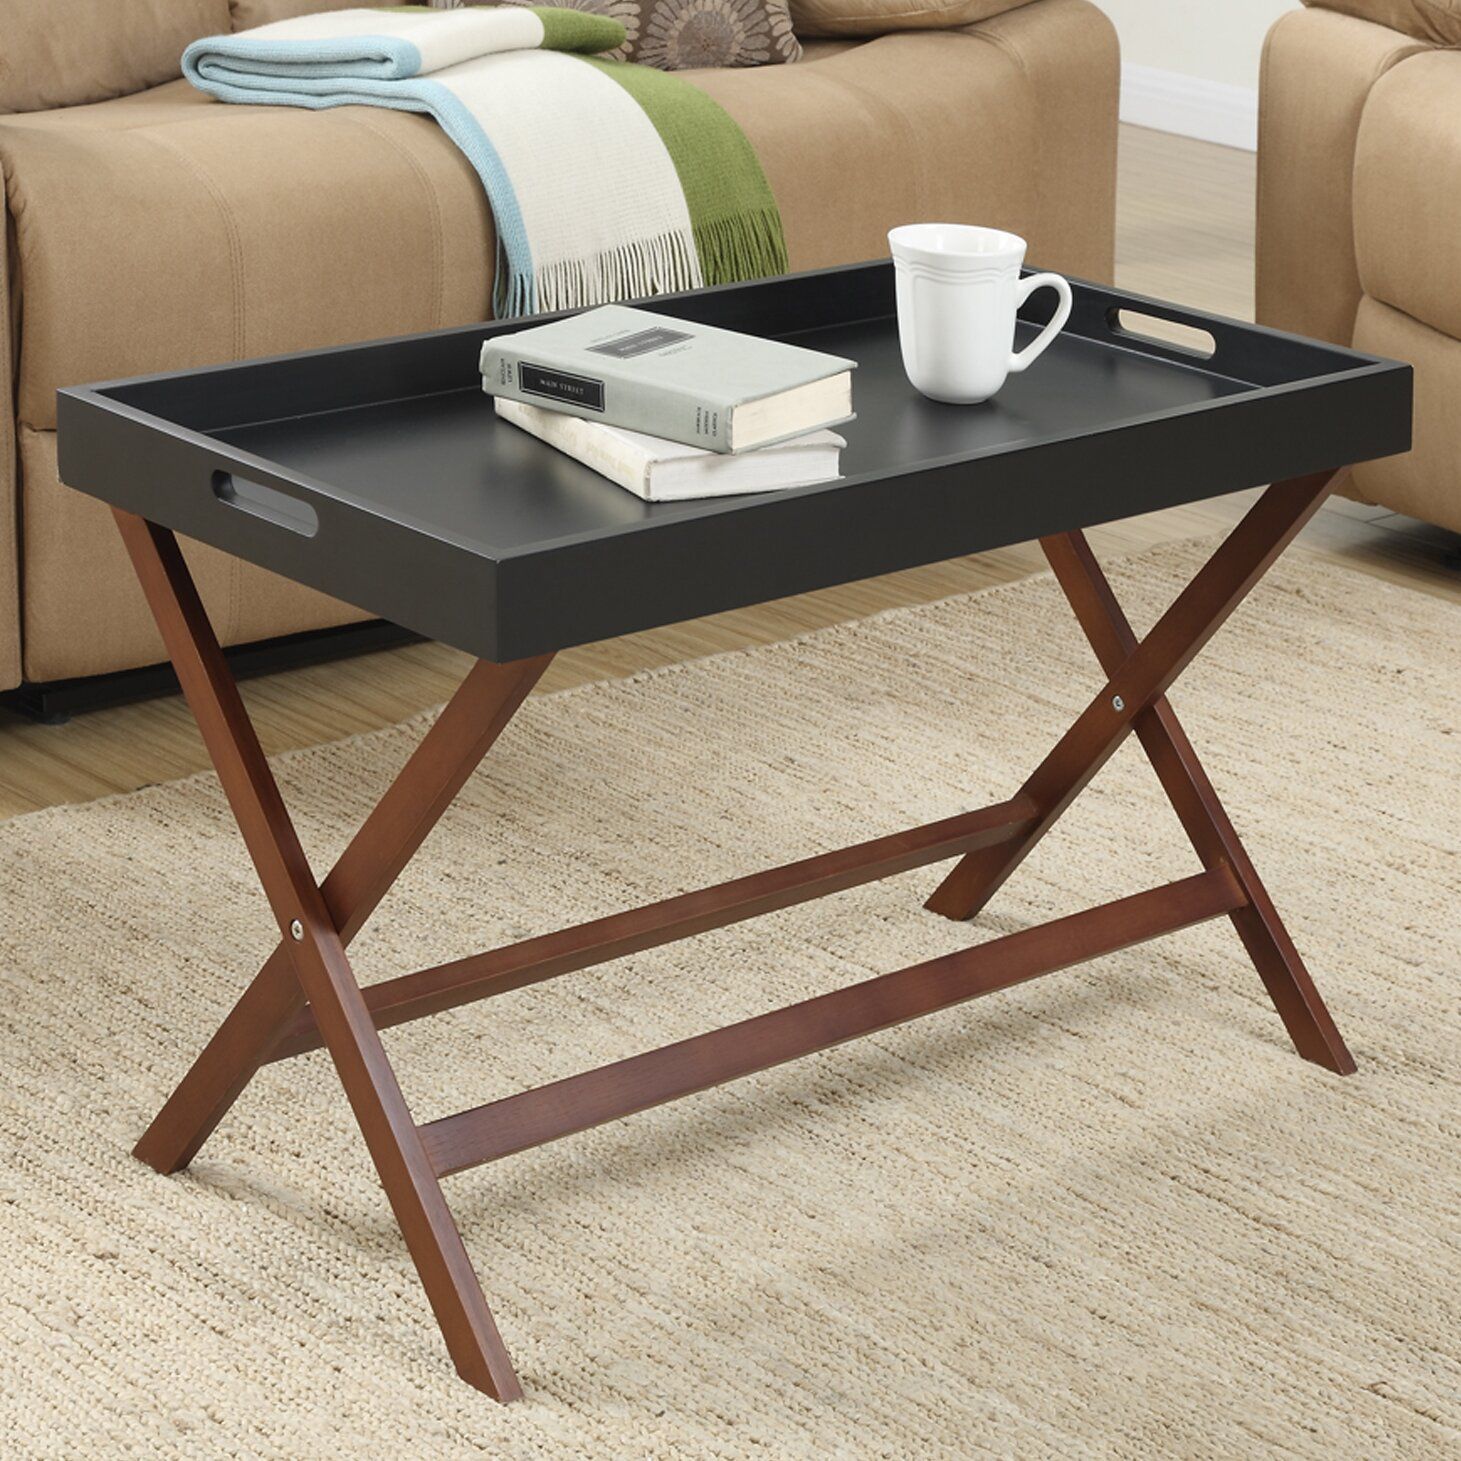 Andover Mills Lockheart Coffee Table With Removable Tray & Reviews Intended For Detachable Tray Coffee Tables (Gallery 2 of 20)